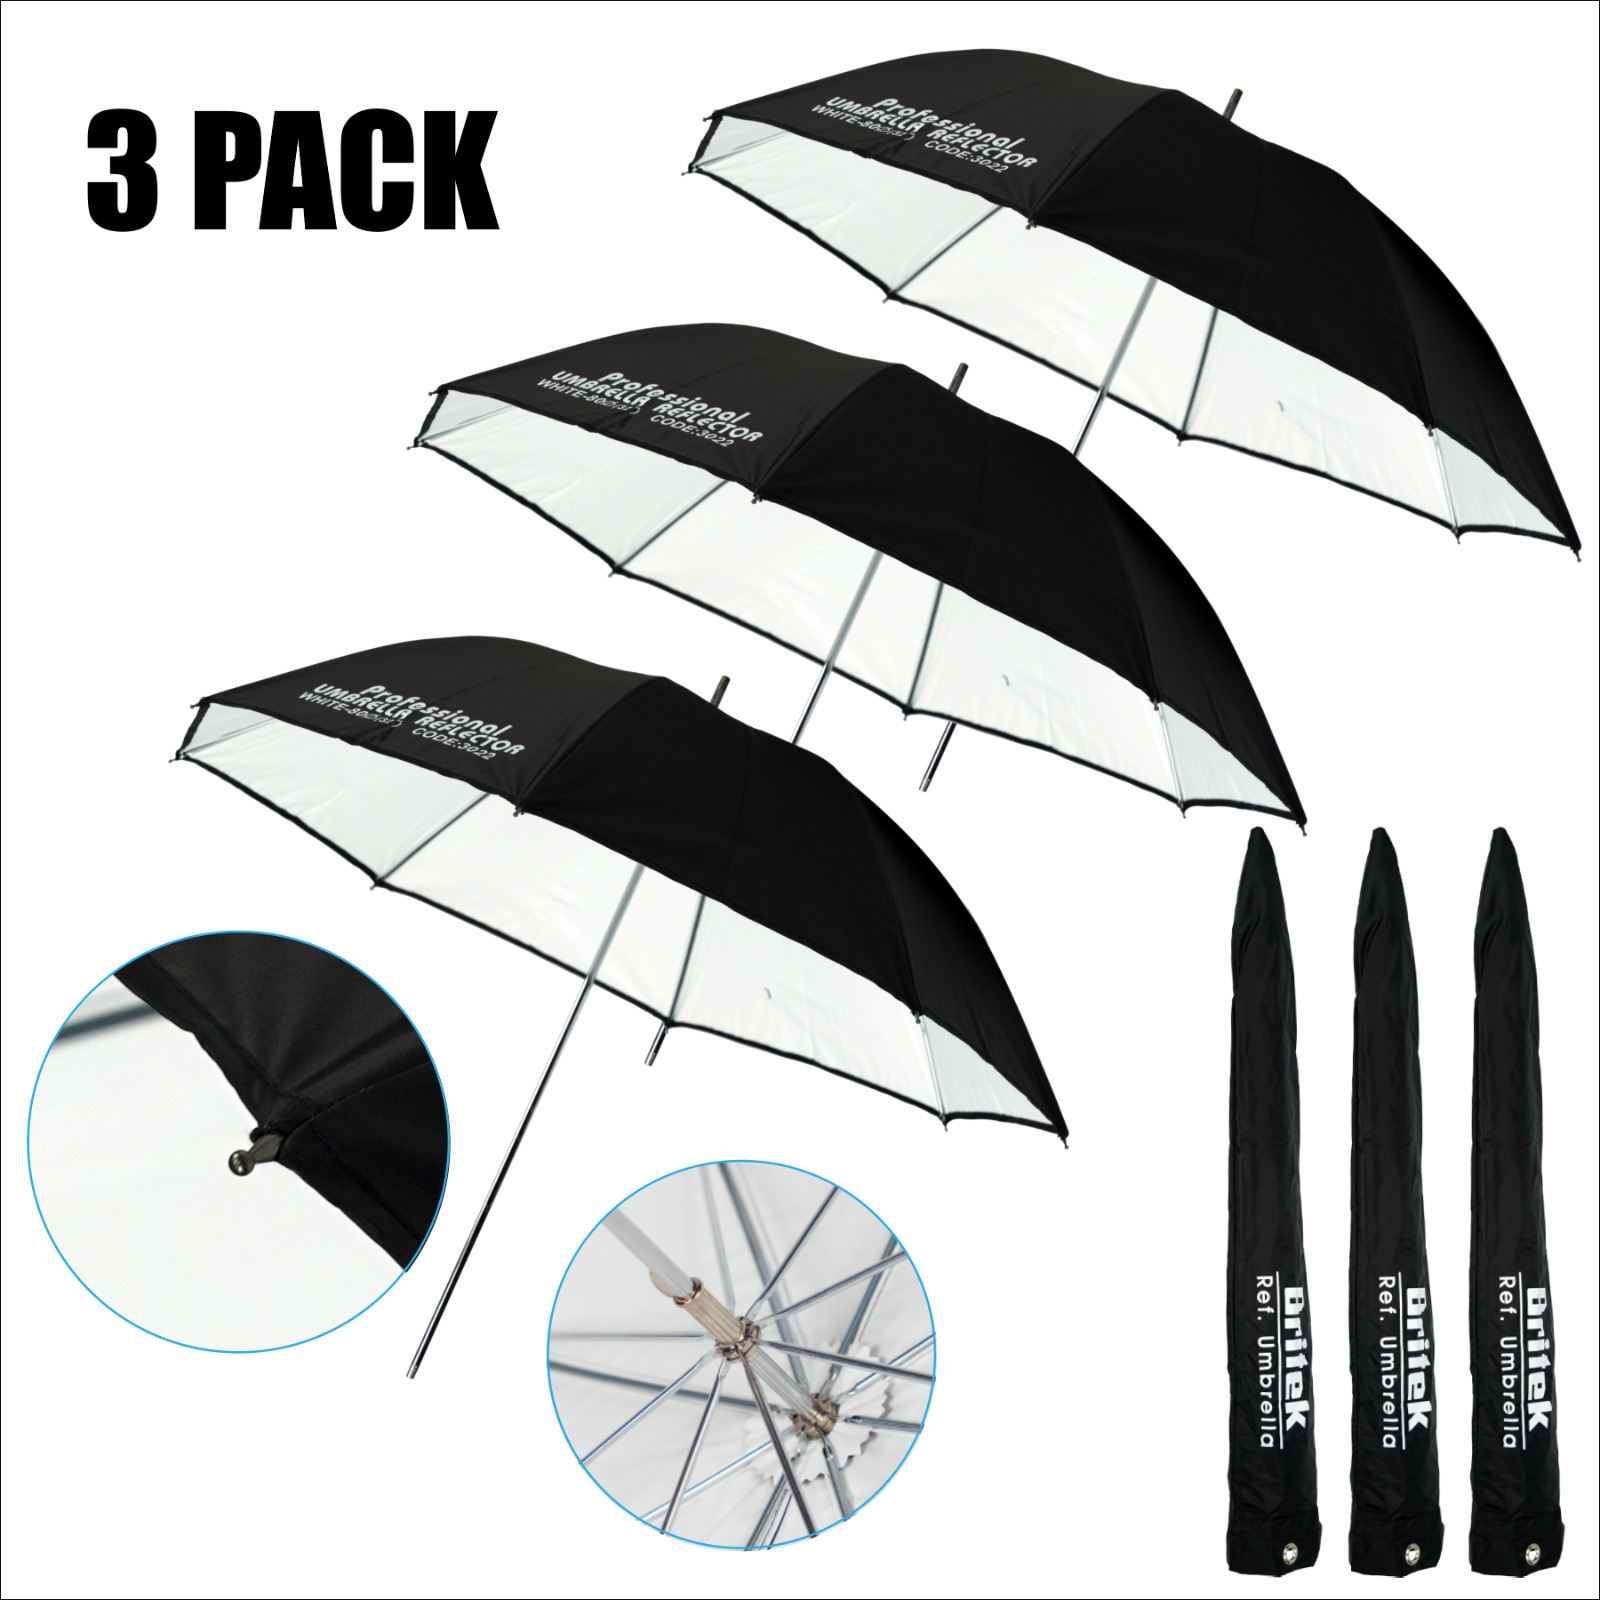 3 Pack - 32" Black/white Reflector Studio Umbrella For Photography, Metal Parts